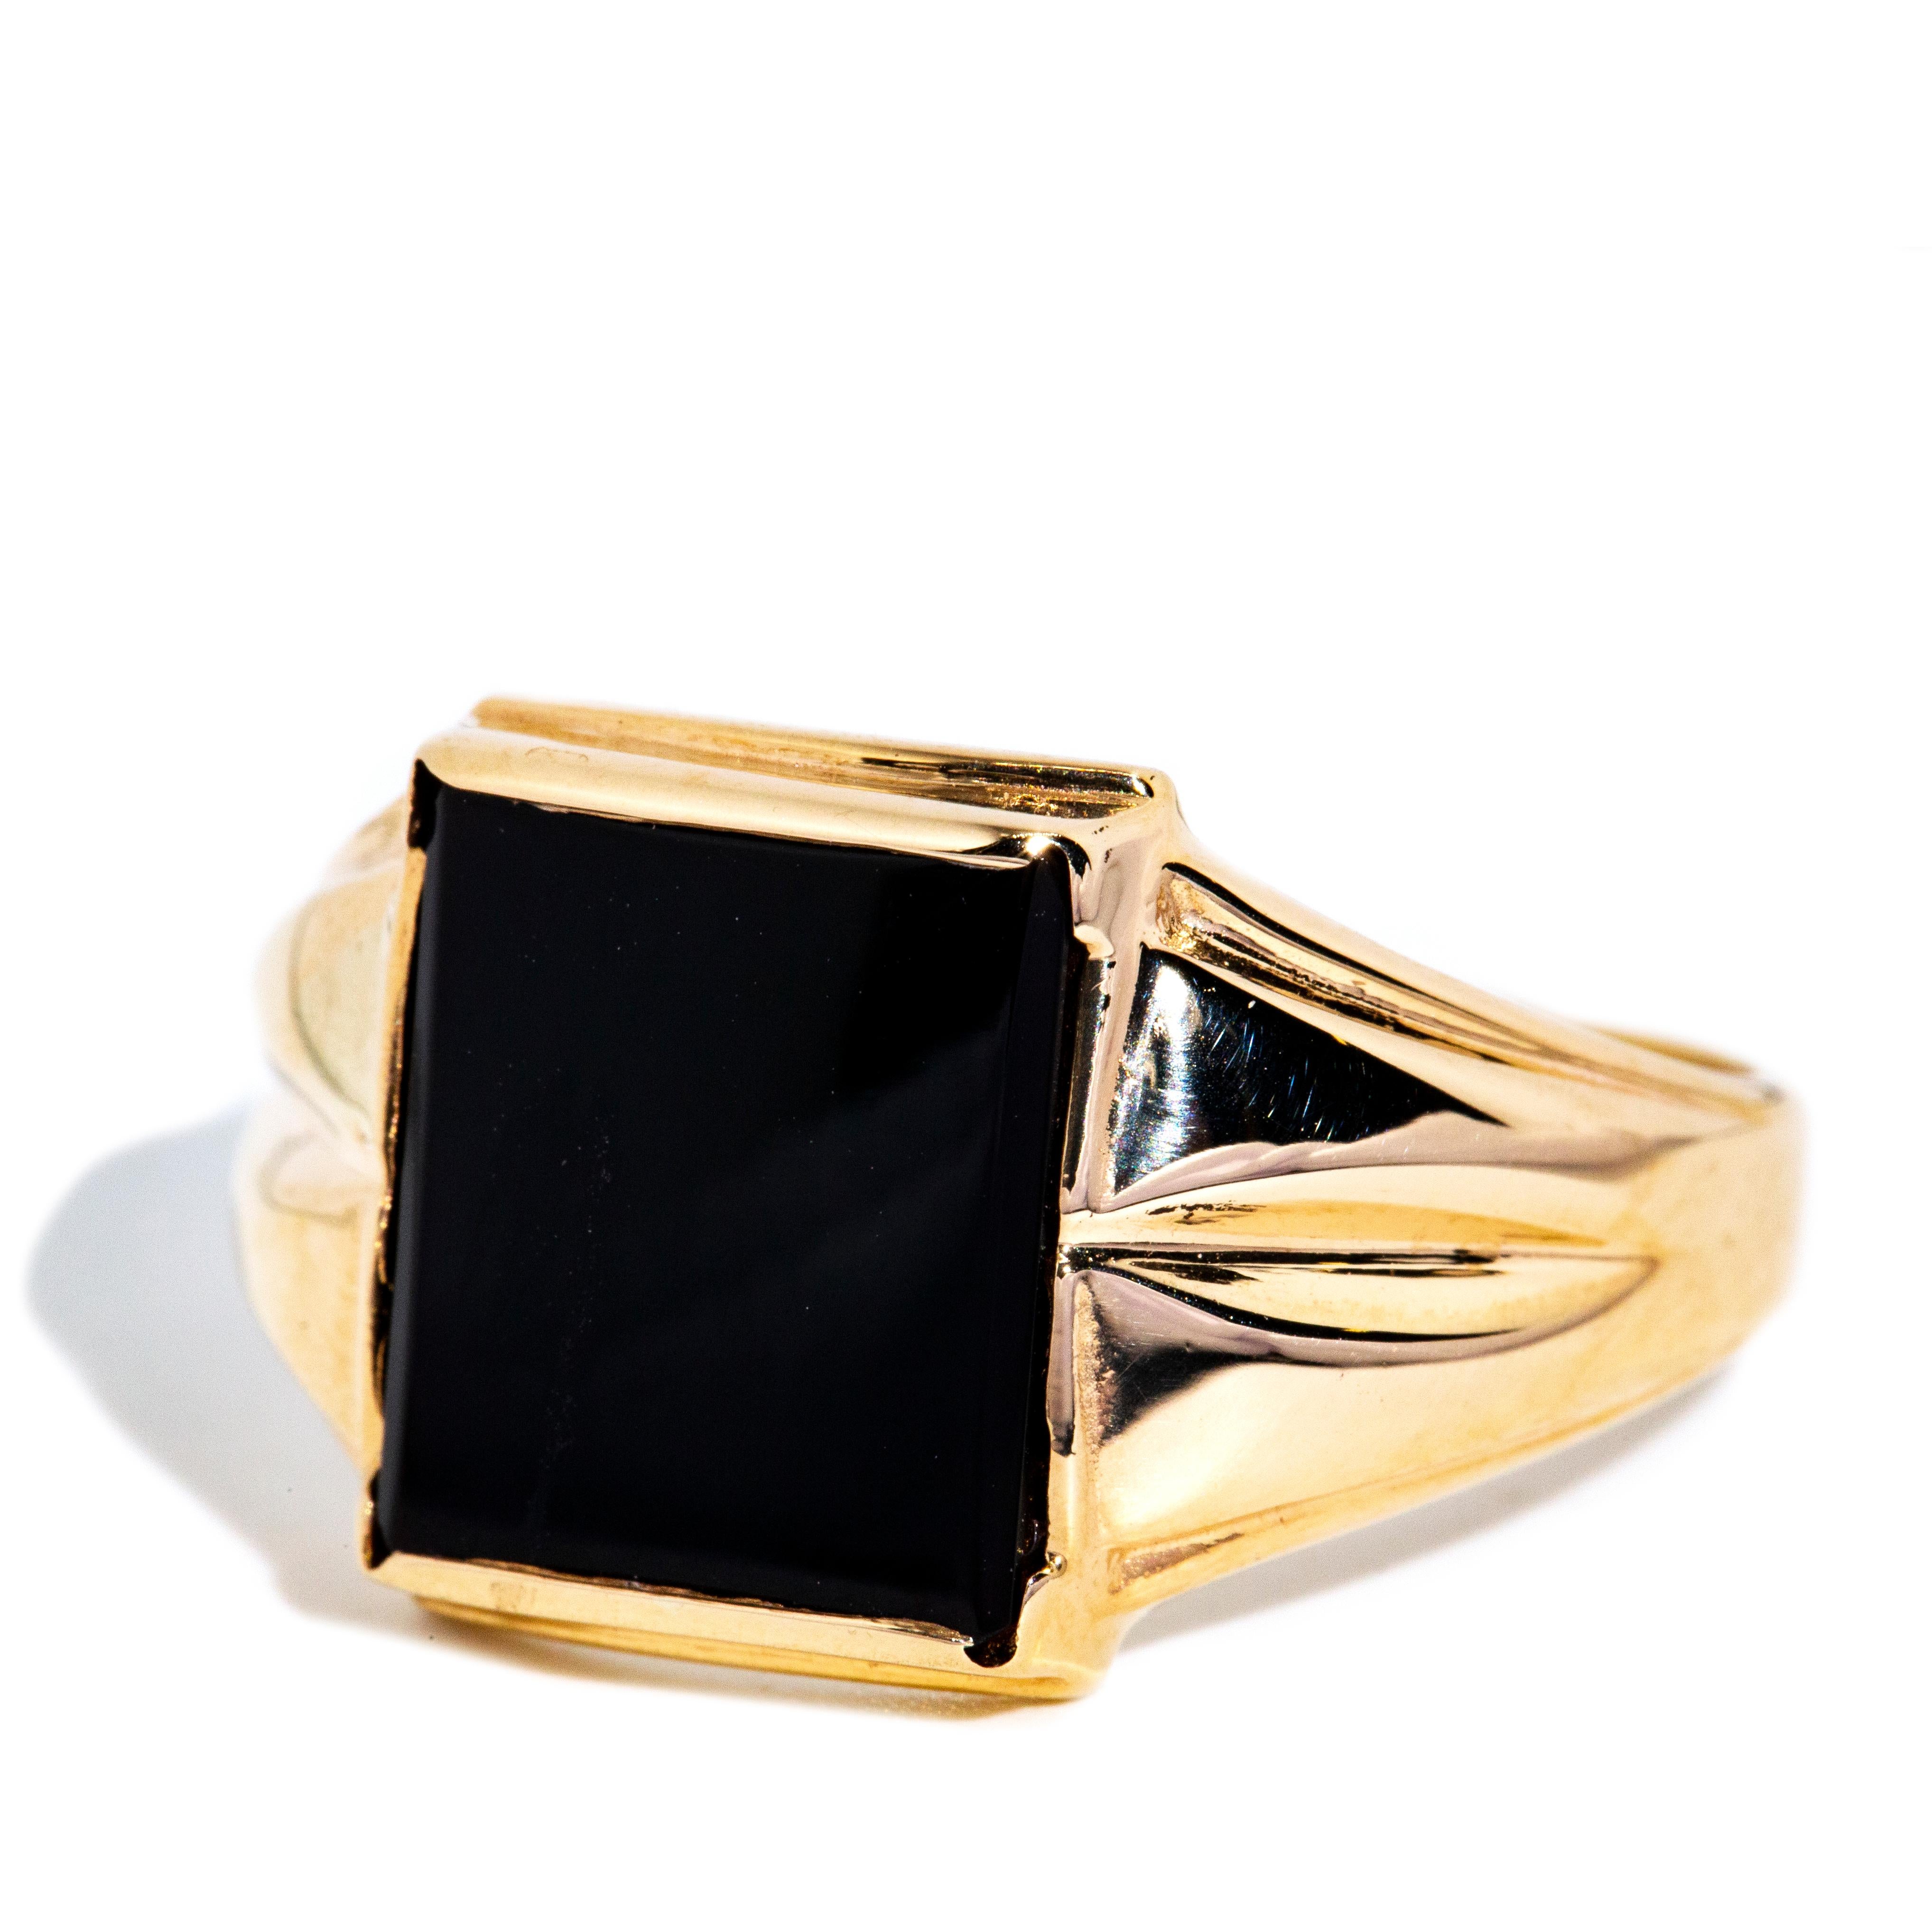 Emerald Cut Vintage Circa 1970s Grooved Black Buff Top Onyx Signet Ring 9 Carat Yellow Gold For Sale